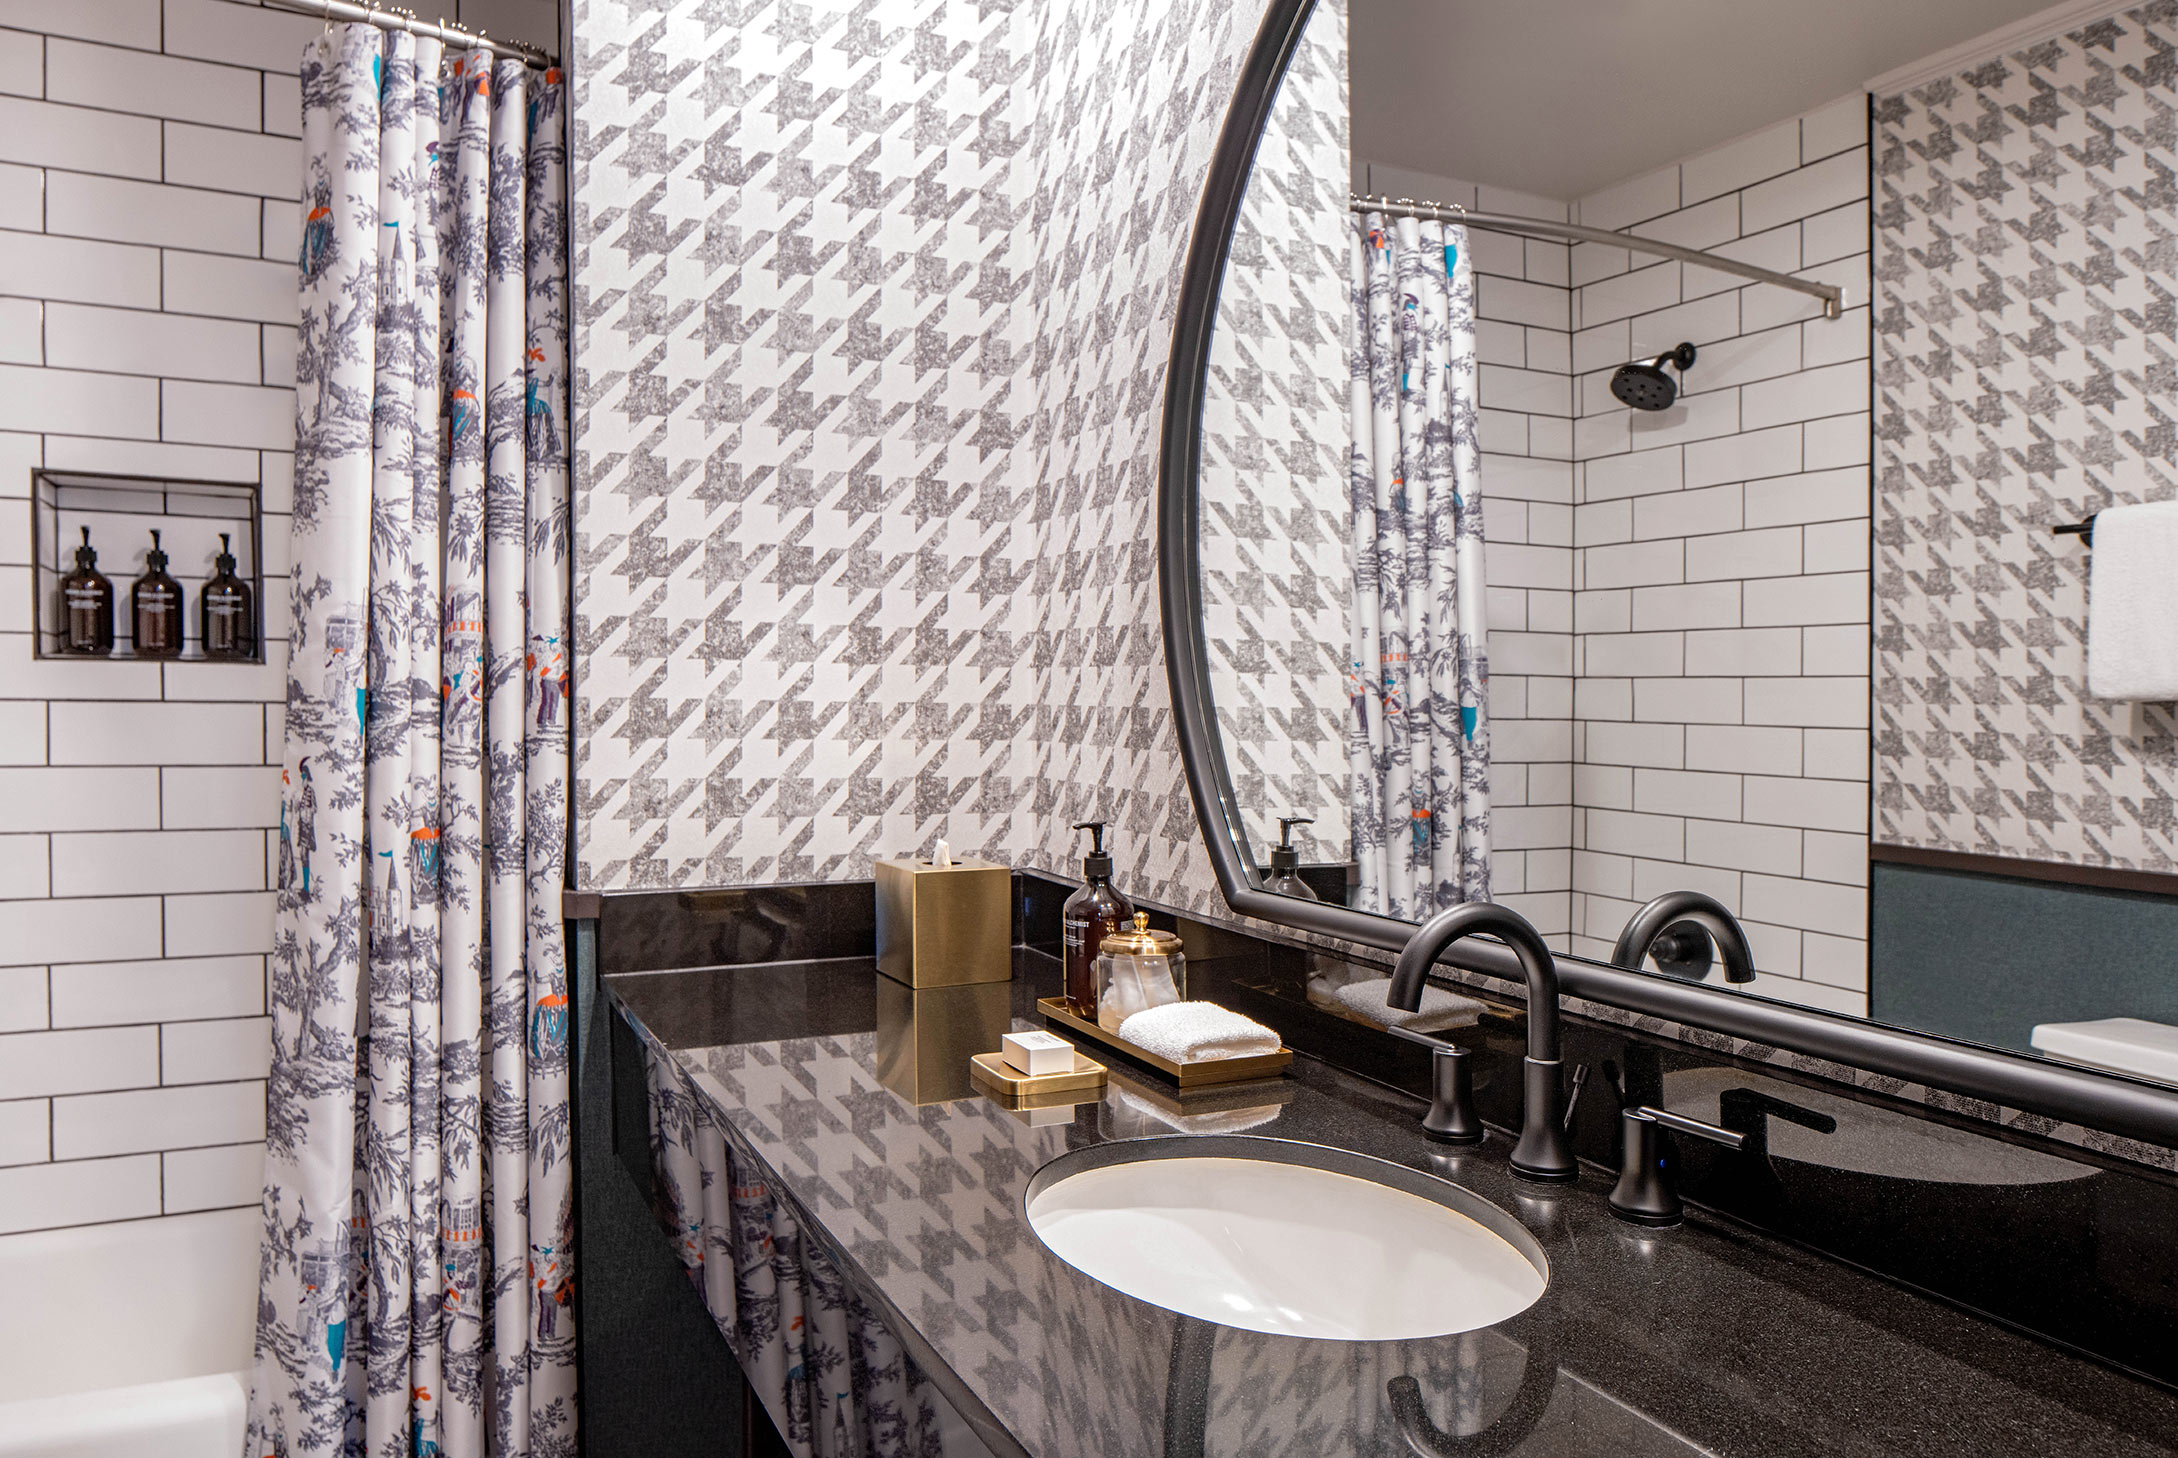 Interior image of a bathroom with houndstooth wallpaper and black countertops